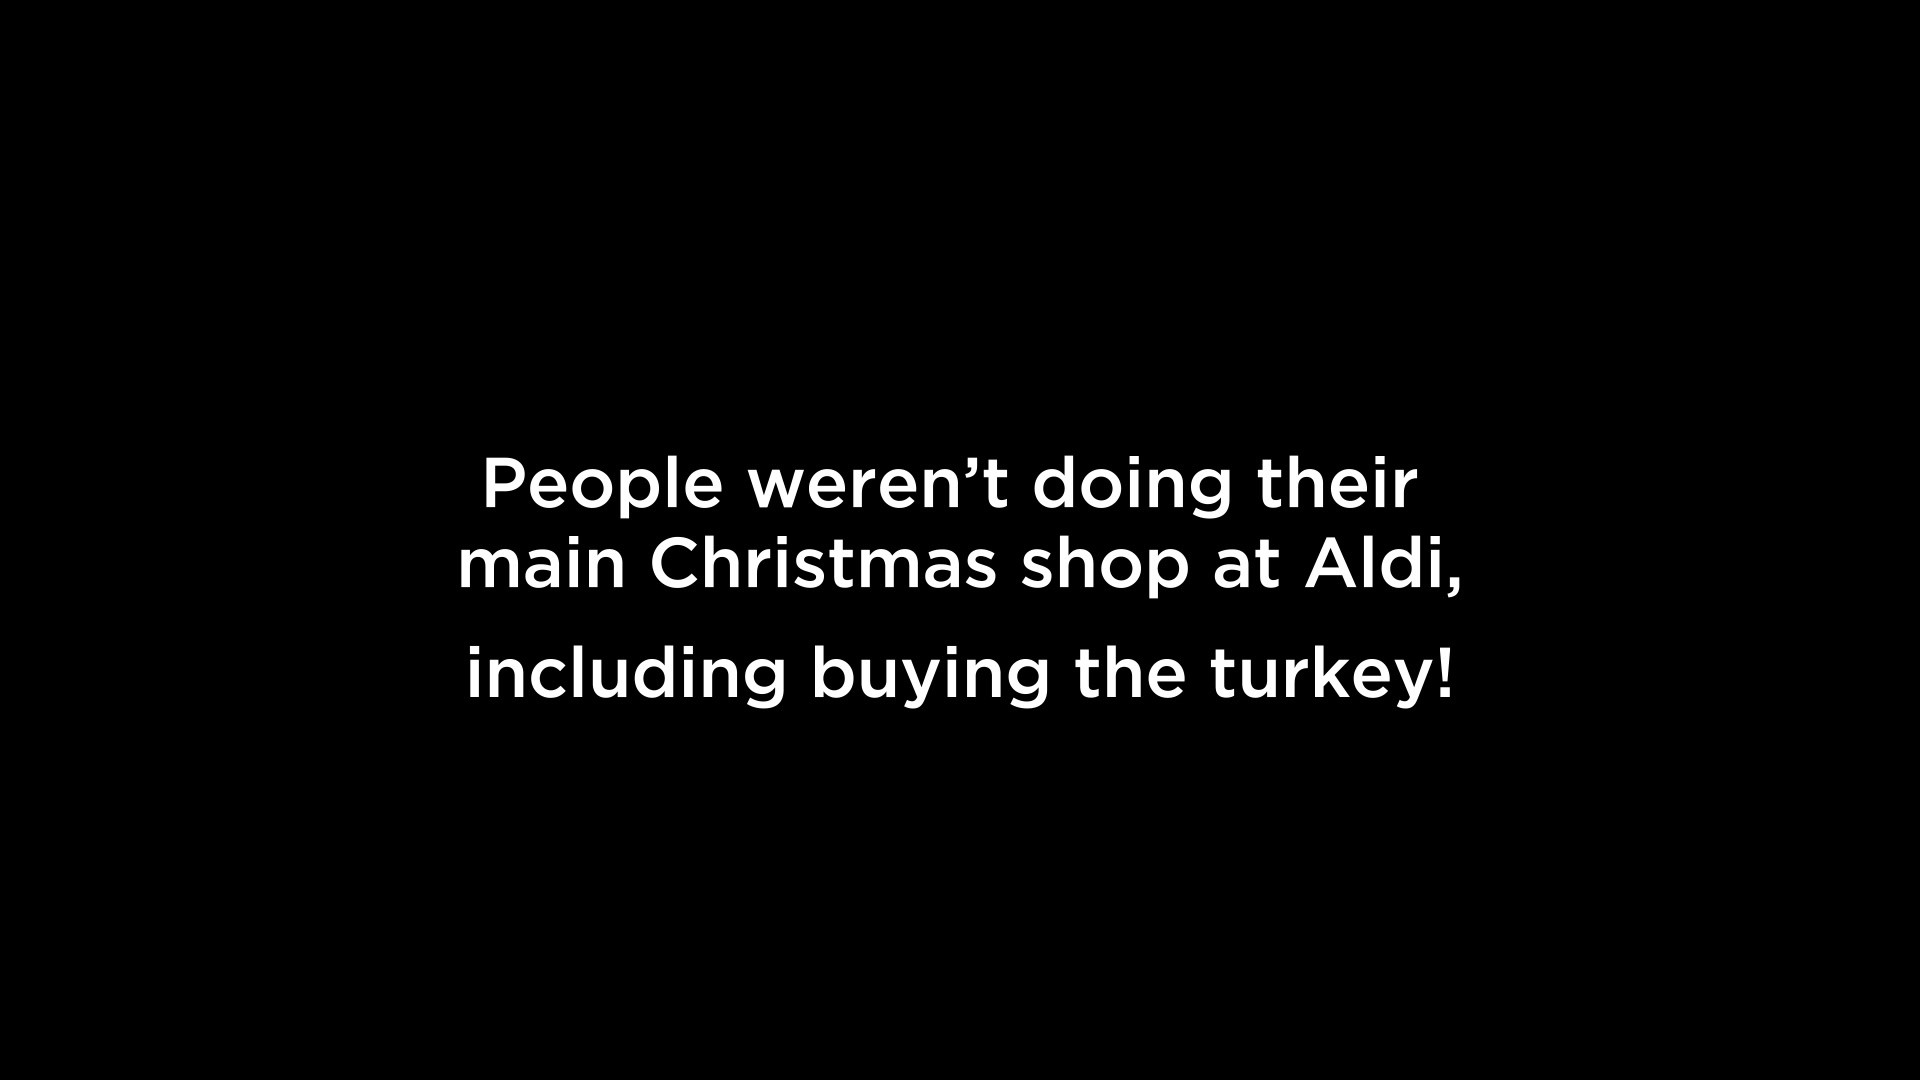 How Aldi won at Christmas by getting Kevin to talk turkey